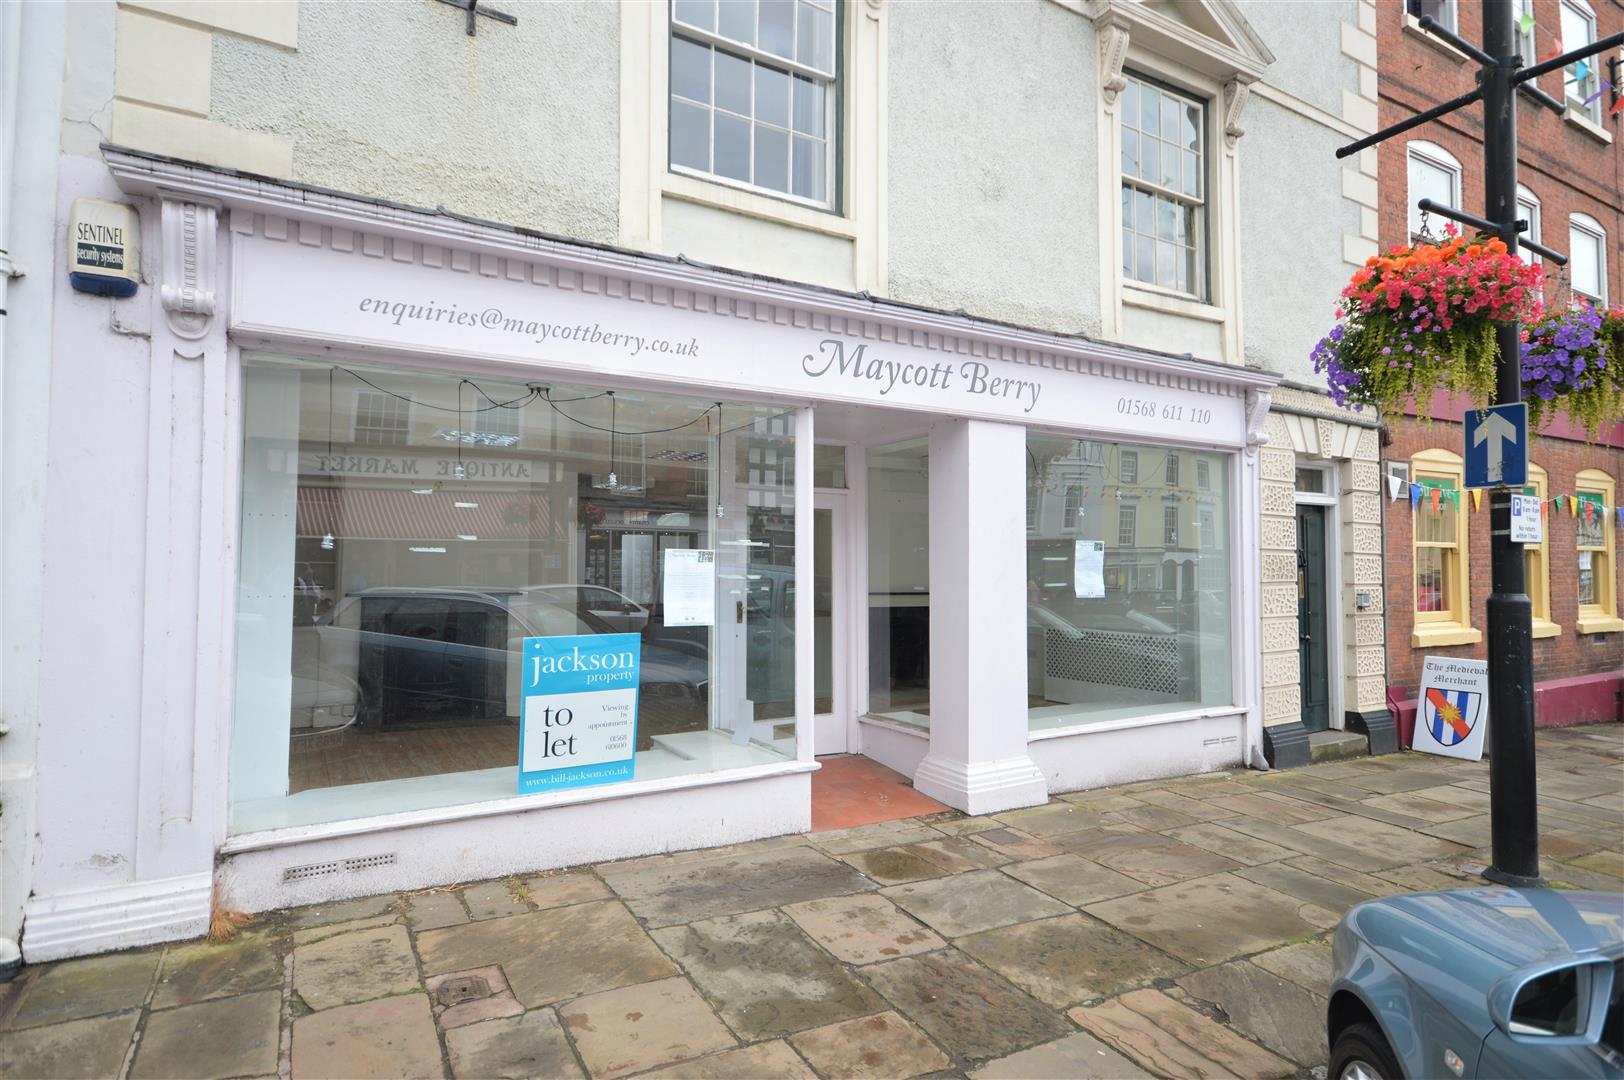 Retail property (high street) to rent in Leominster, HR6